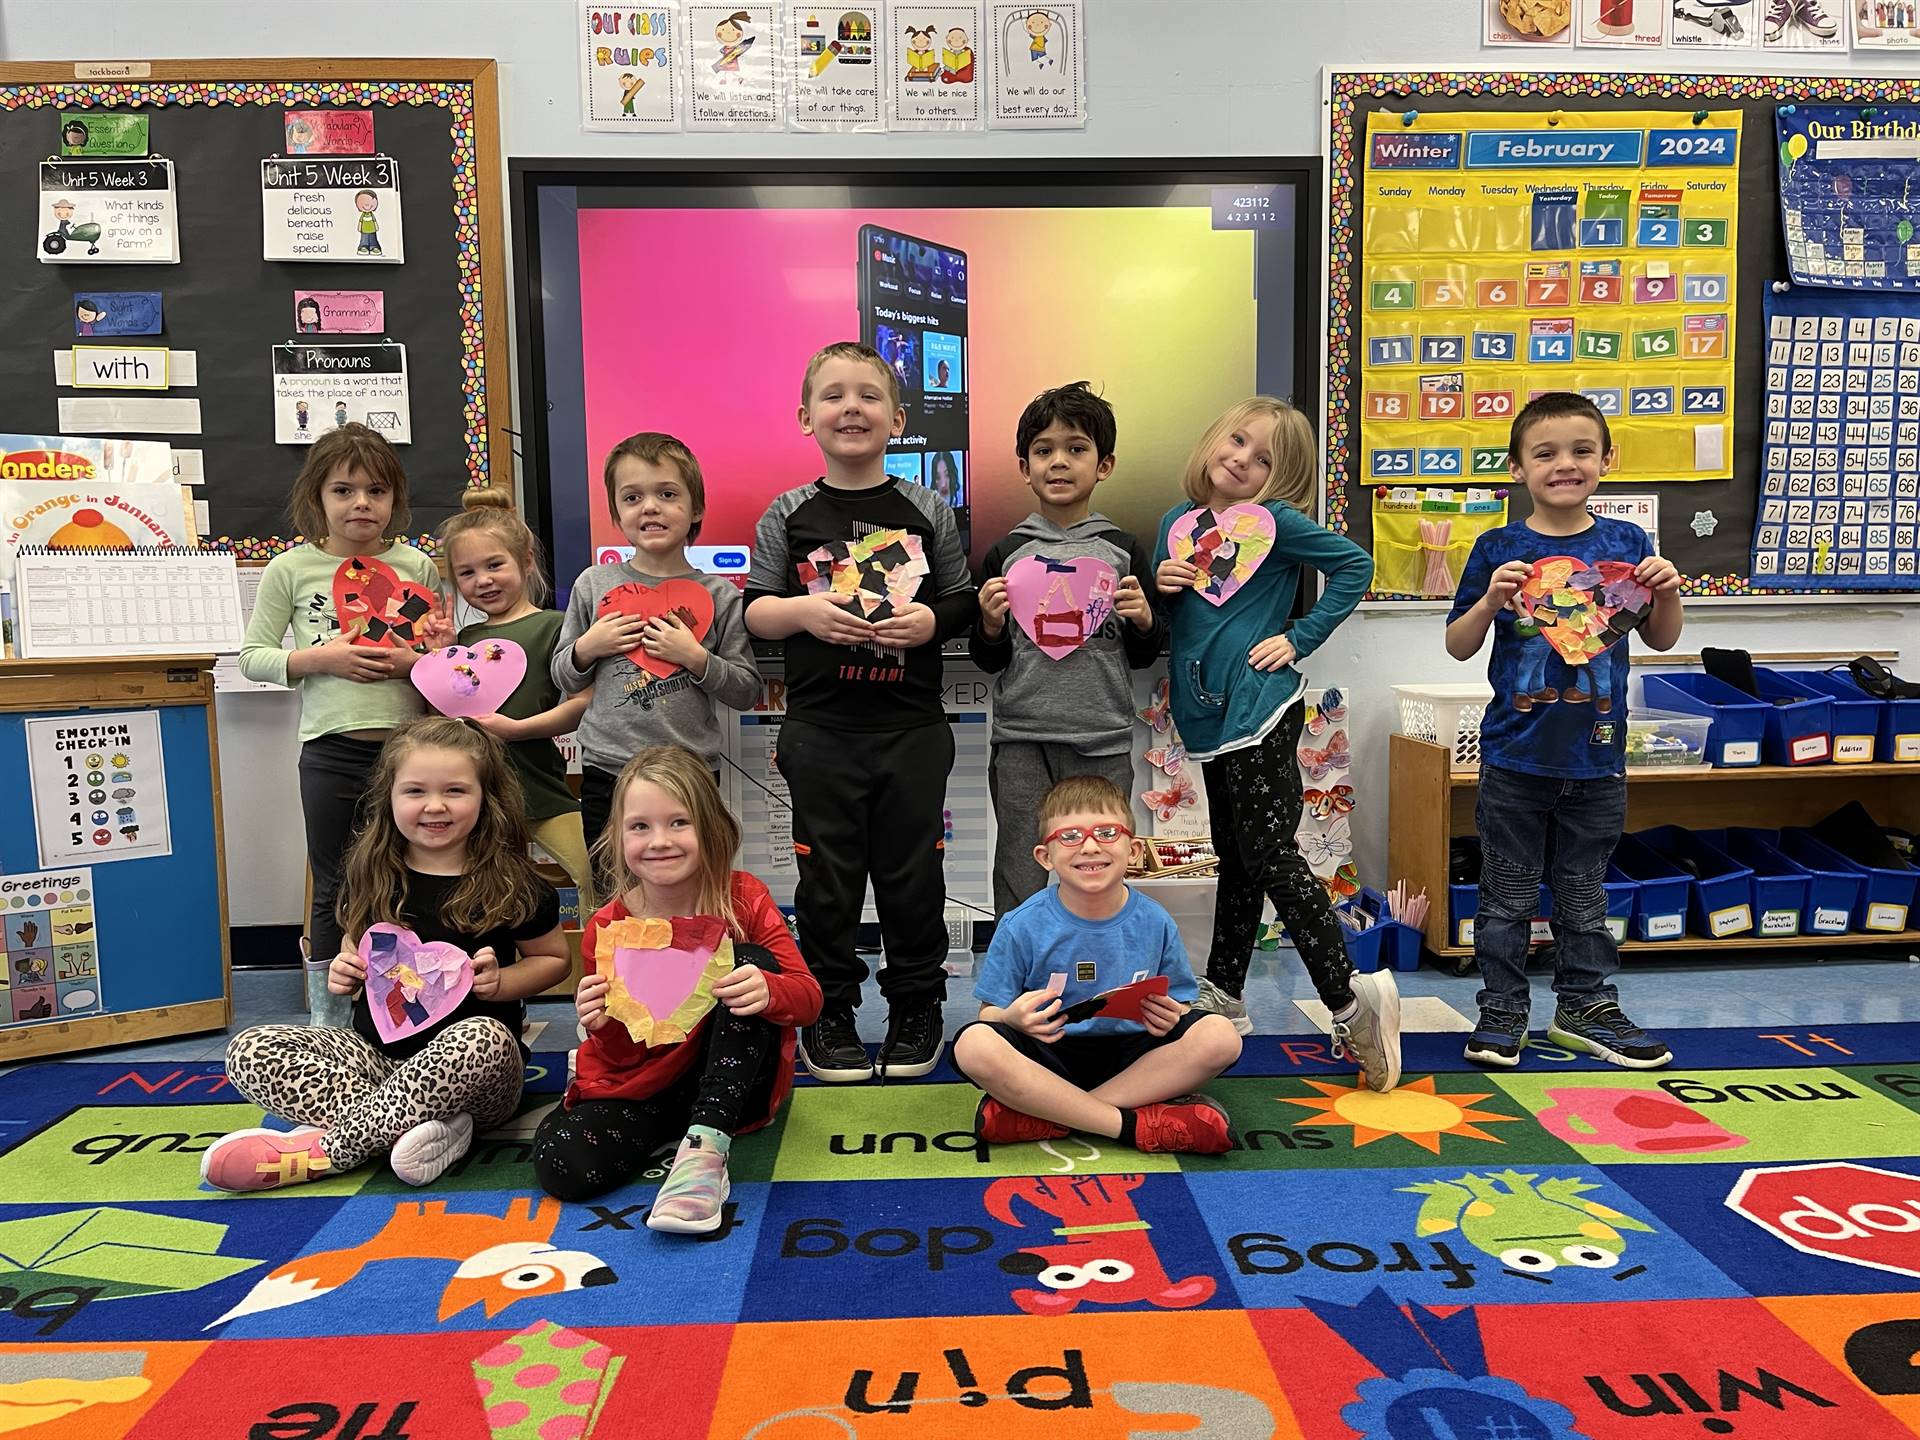 students hold a decorated heart.